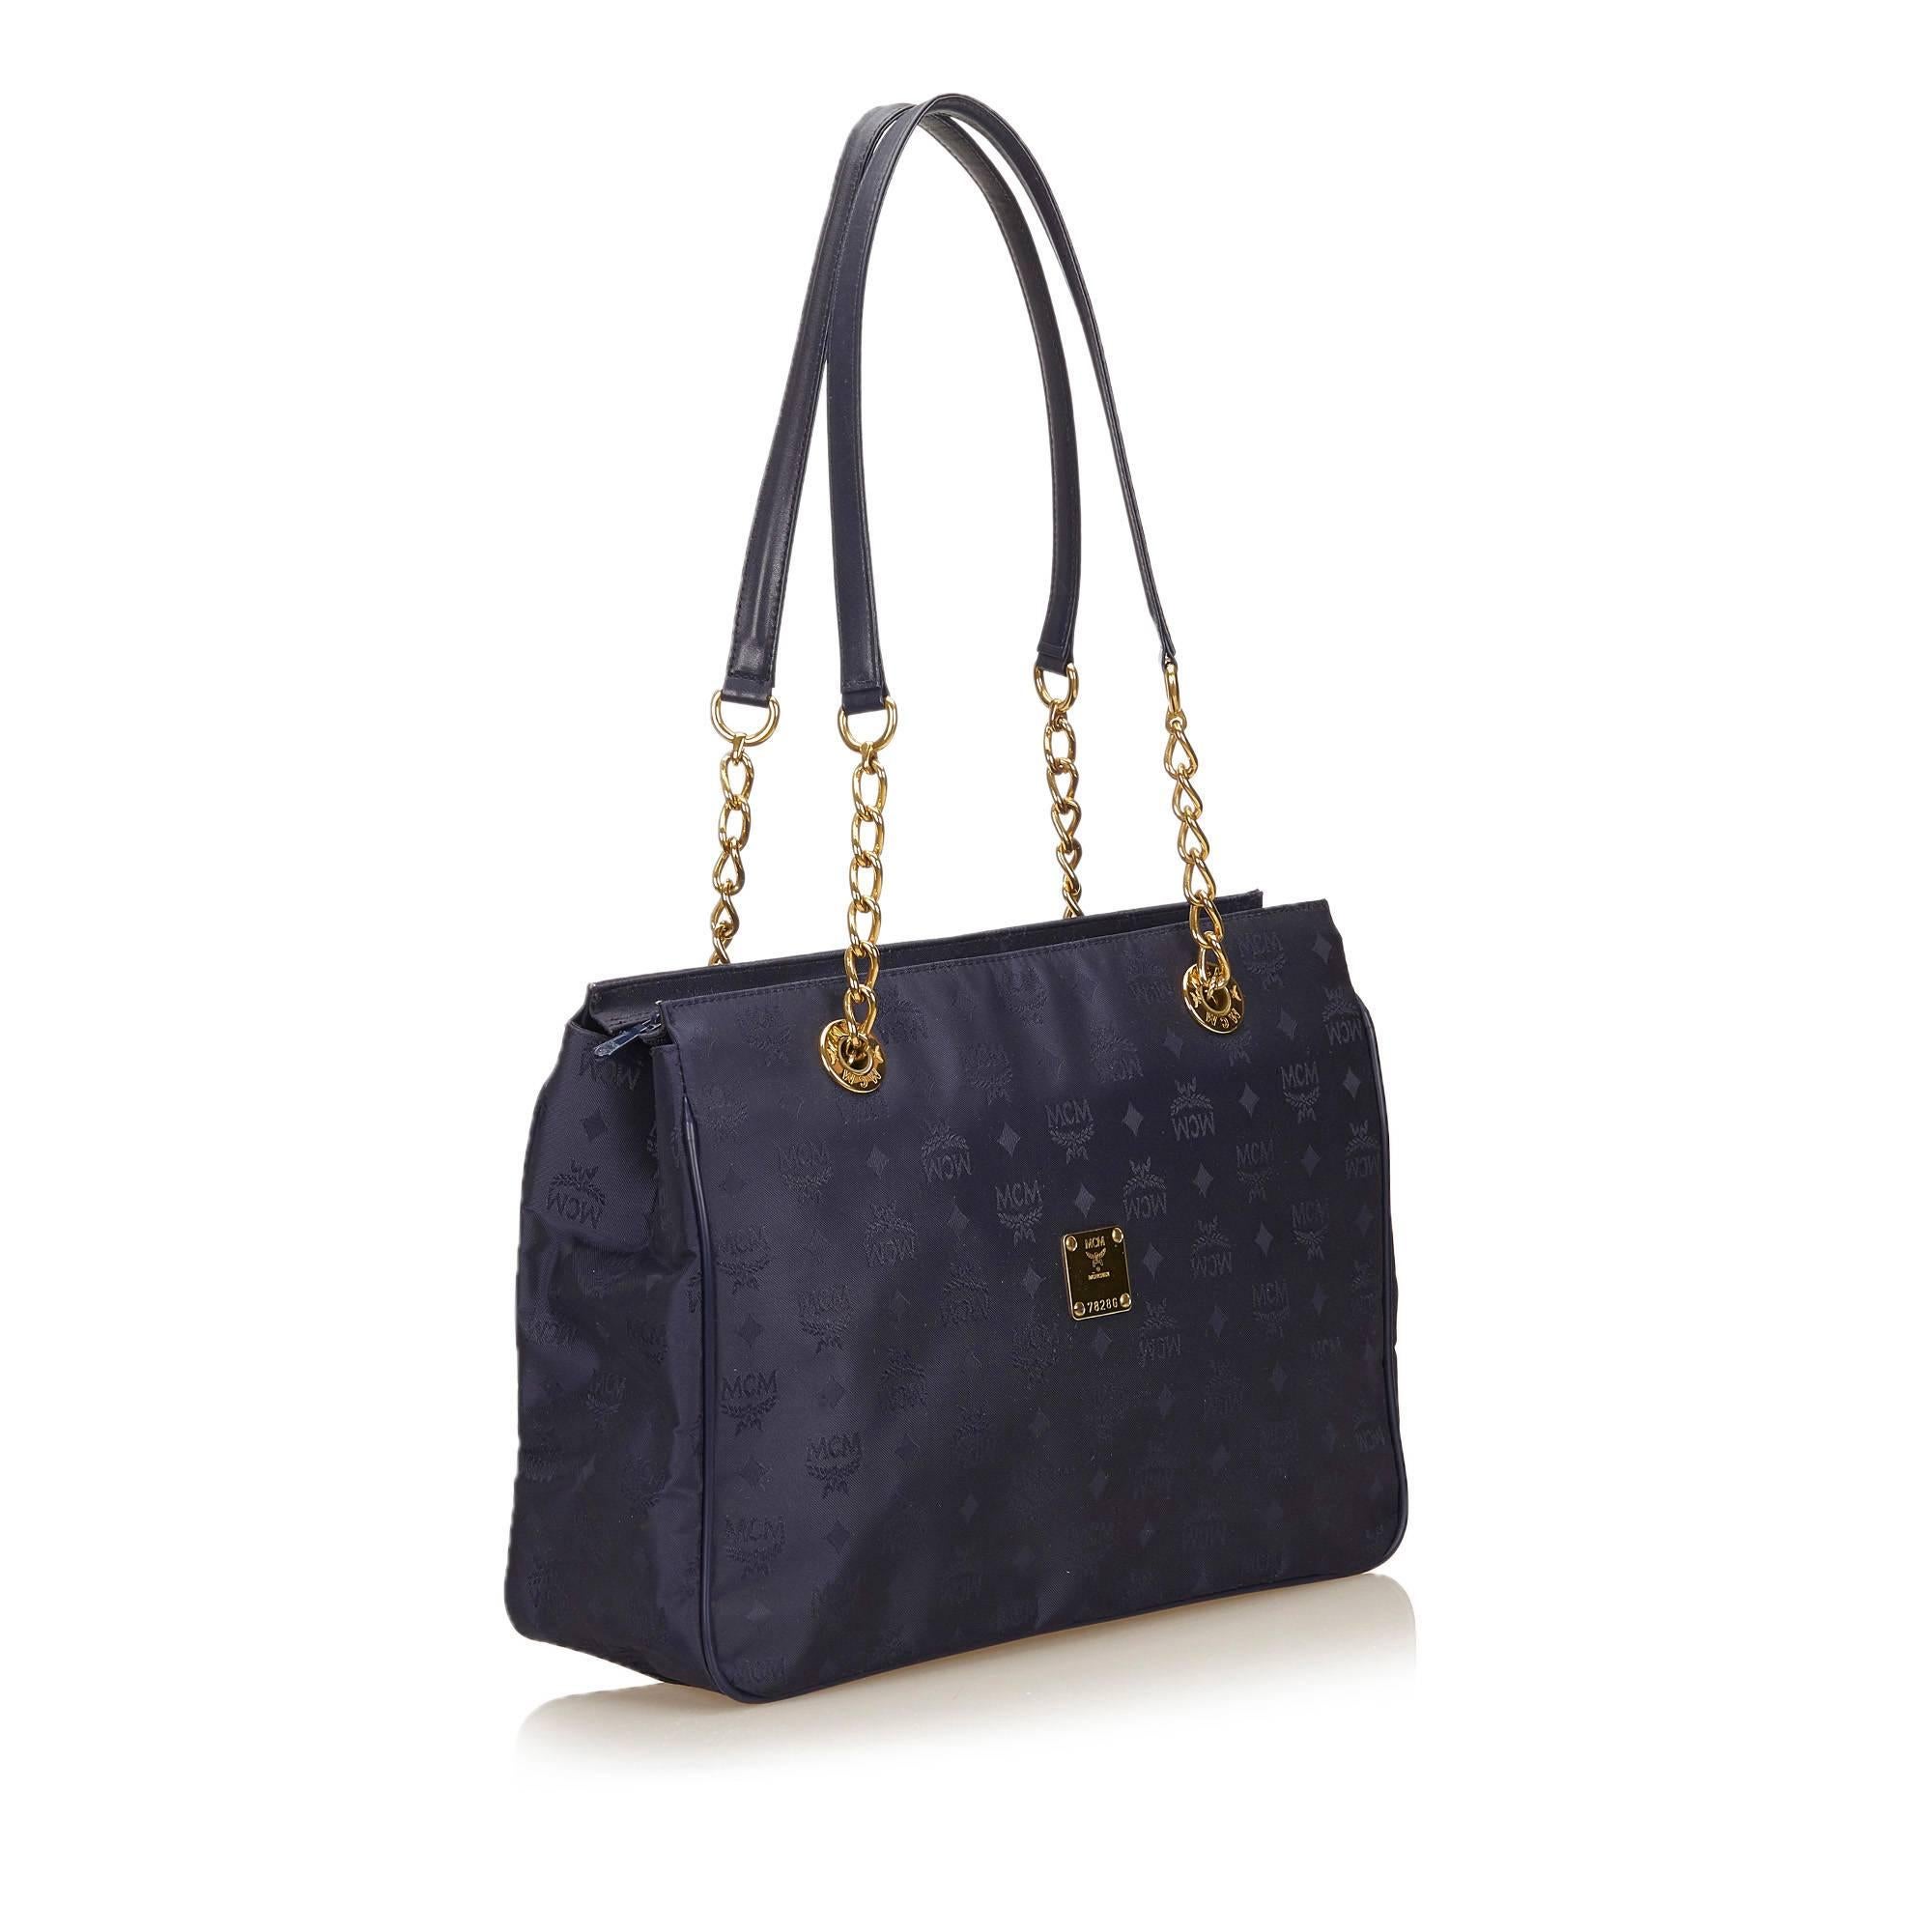 This shoulder bag features a nylon body, flat lether straps with gold-tone chains, a top zip closure, and interior slip pockets. It carries a AB condition rating.

Inclusions: 
None